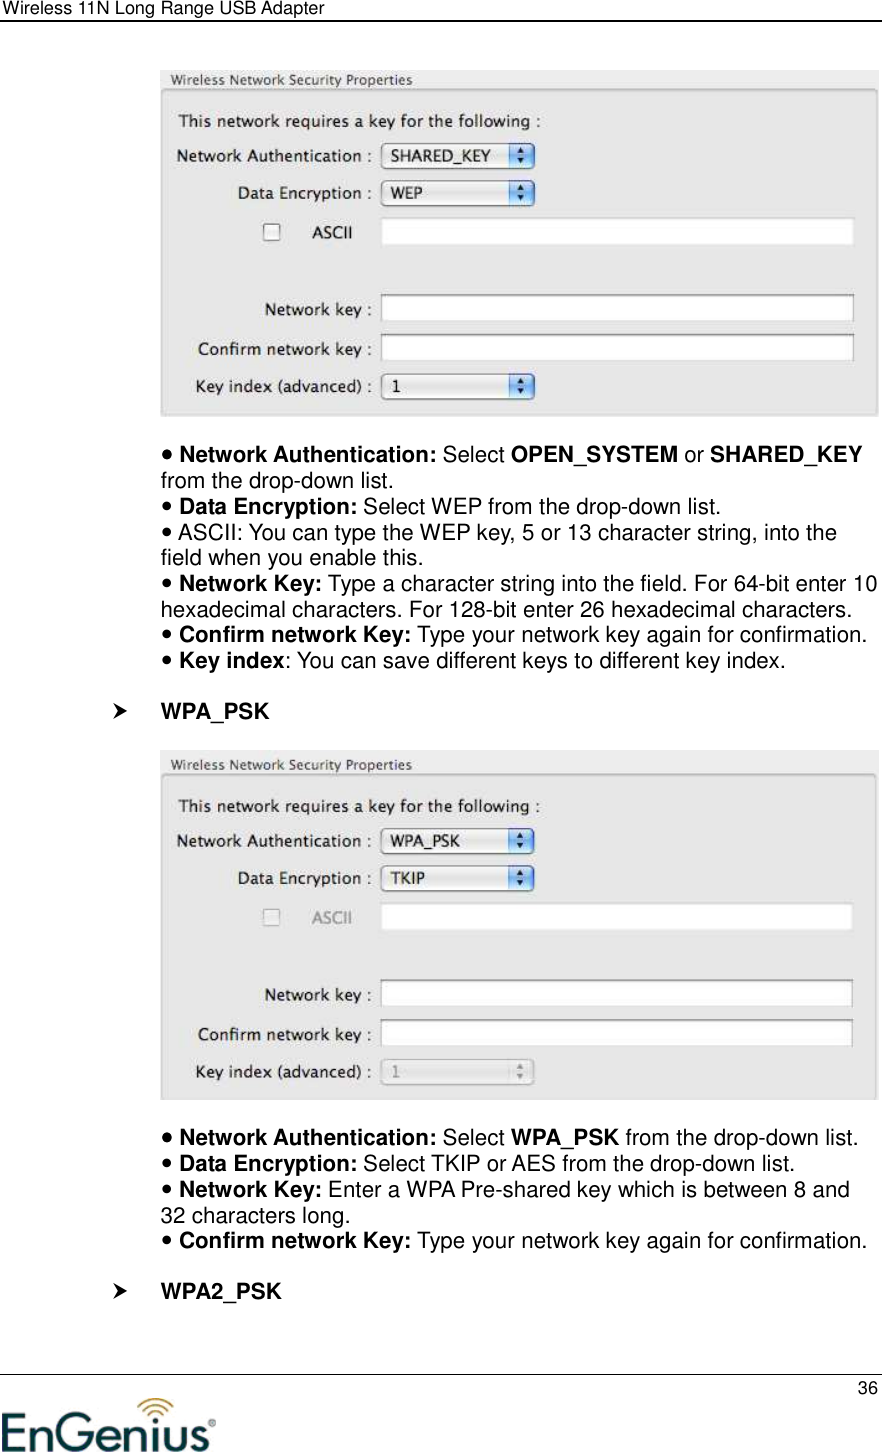 Wireless 11N Long Range USB Adapter  36     Network Authentication: Select OPEN_SYSTEM or SHARED_KEY from the drop-down list.   Data Encryption: Select WEP from the drop-down list.   ASCII: You can type the WEP key, 5 or 13 character string, into the field when you enable this.  Network Key: Type a character string into the field. For 64-bit enter 10 hexadecimal characters. For 128-bit enter 26 hexadecimal characters.   Confirm network Key: Type your network key again for confirmation.  Key index: You can save different keys to different key index.   WPA_PSK     Network Authentication: Select WPA_PSK from the drop-down list.   Data Encryption: Select TKIP or AES from the drop-down list.   Network Key: Enter a WPA Pre-shared key which is between 8 and 32 characters long.    Confirm network Key: Type your network key again for confirmation.   WPA2_PSK  